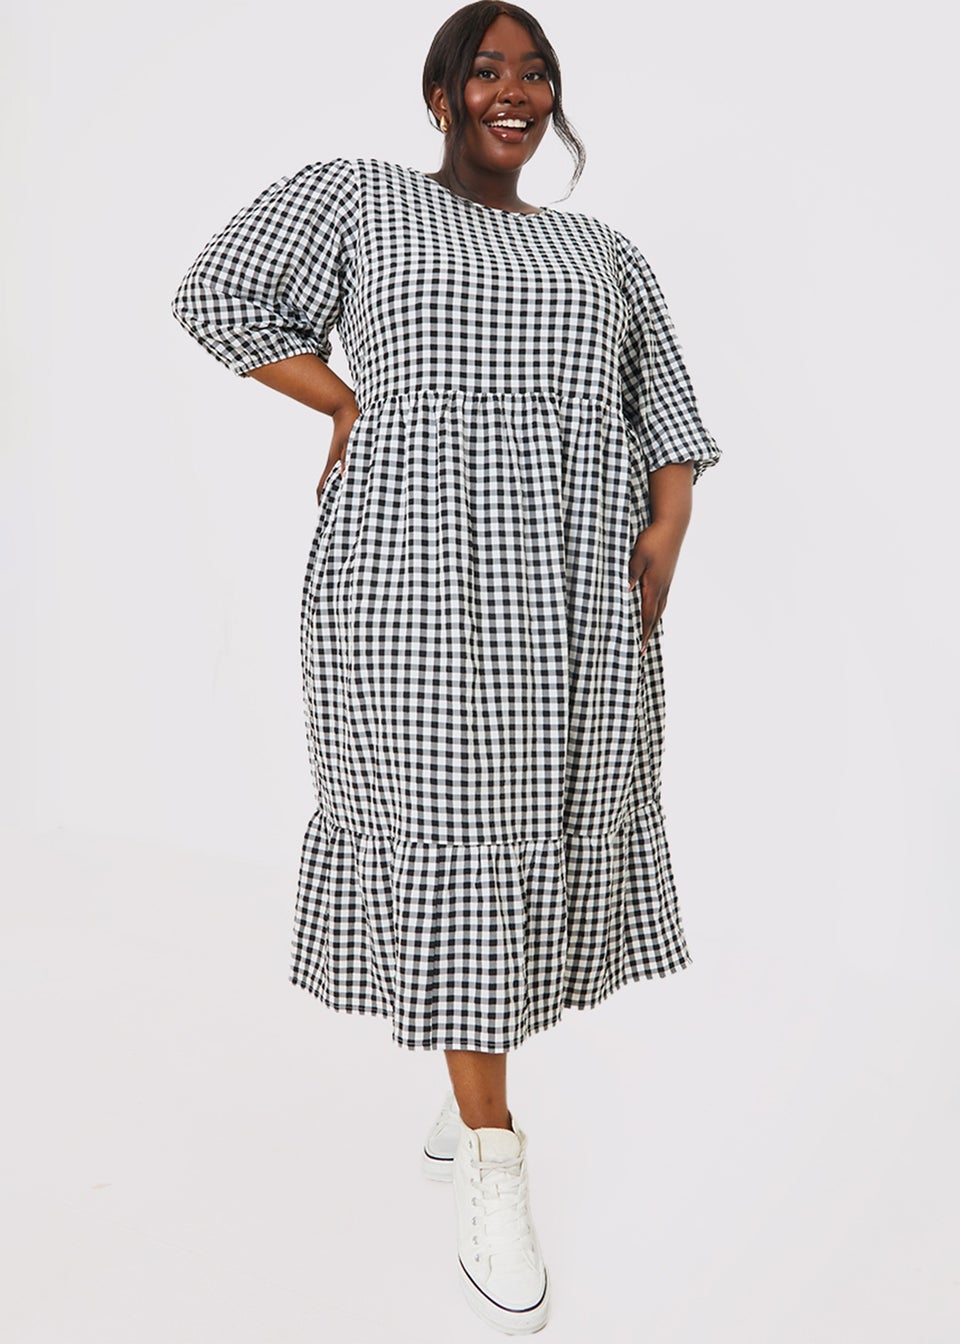 In The Style Stacey Black & White Gingham Midi Dress